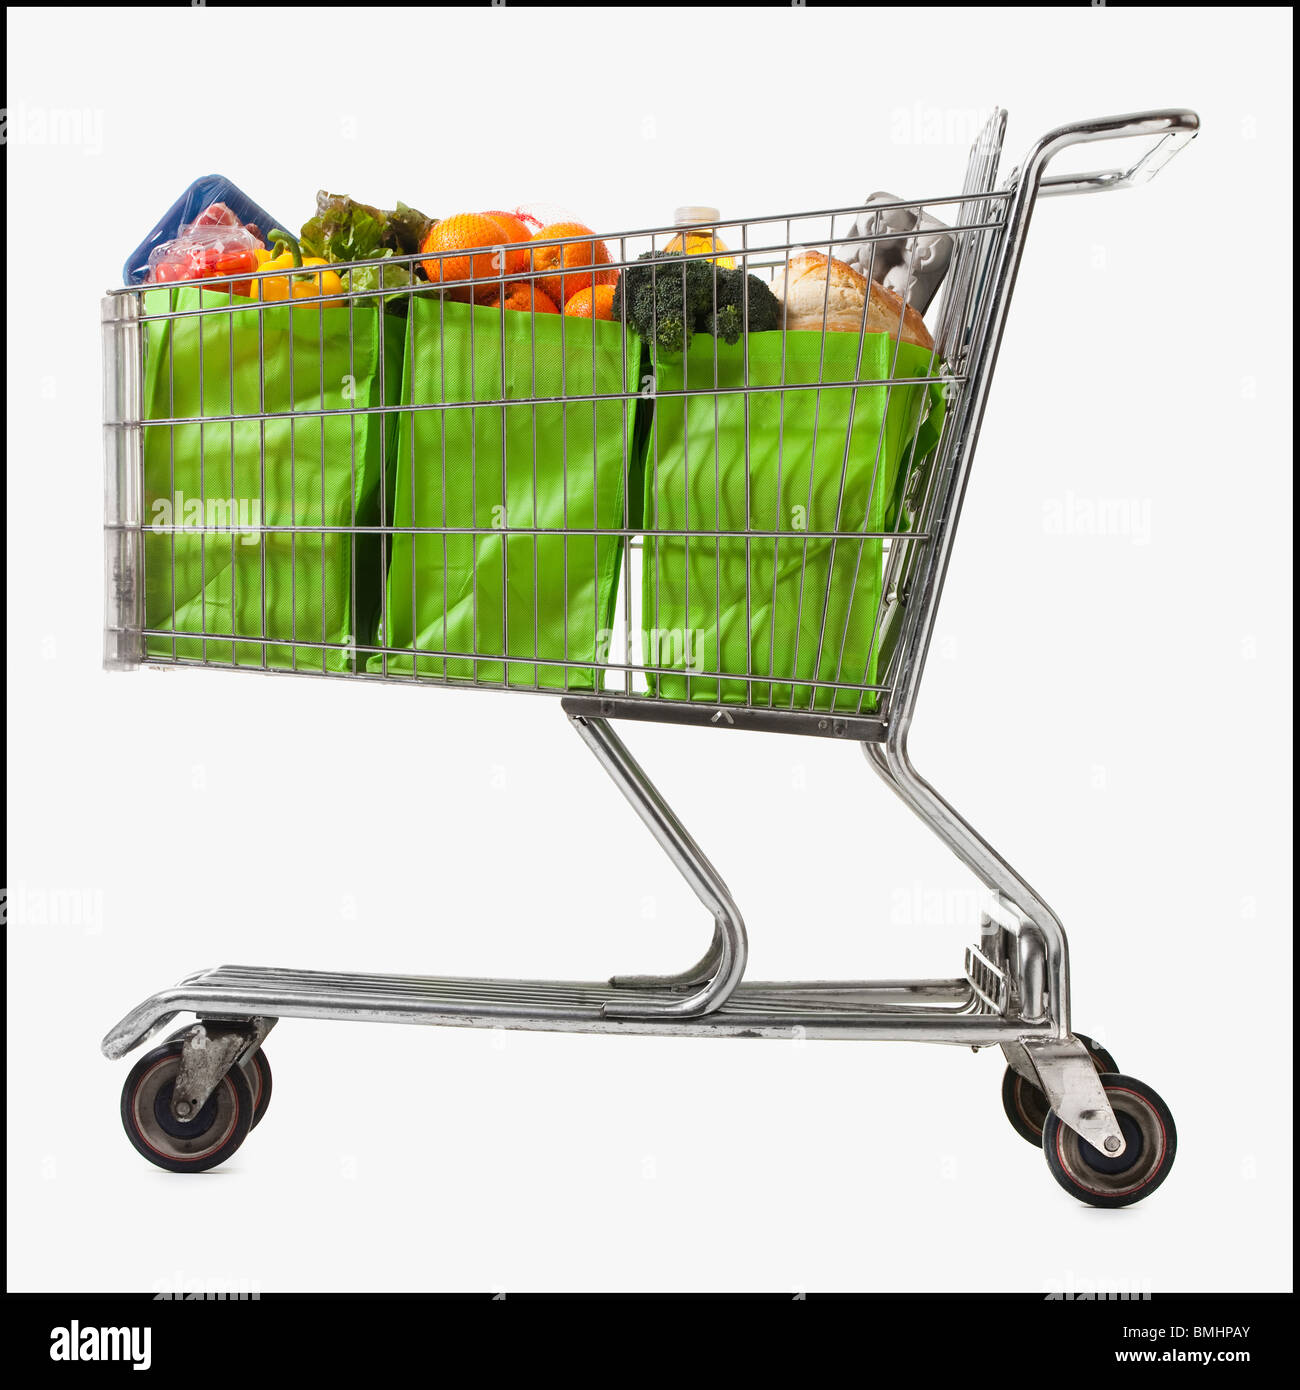 Grocery cart full of bags of groceries Stock Photo